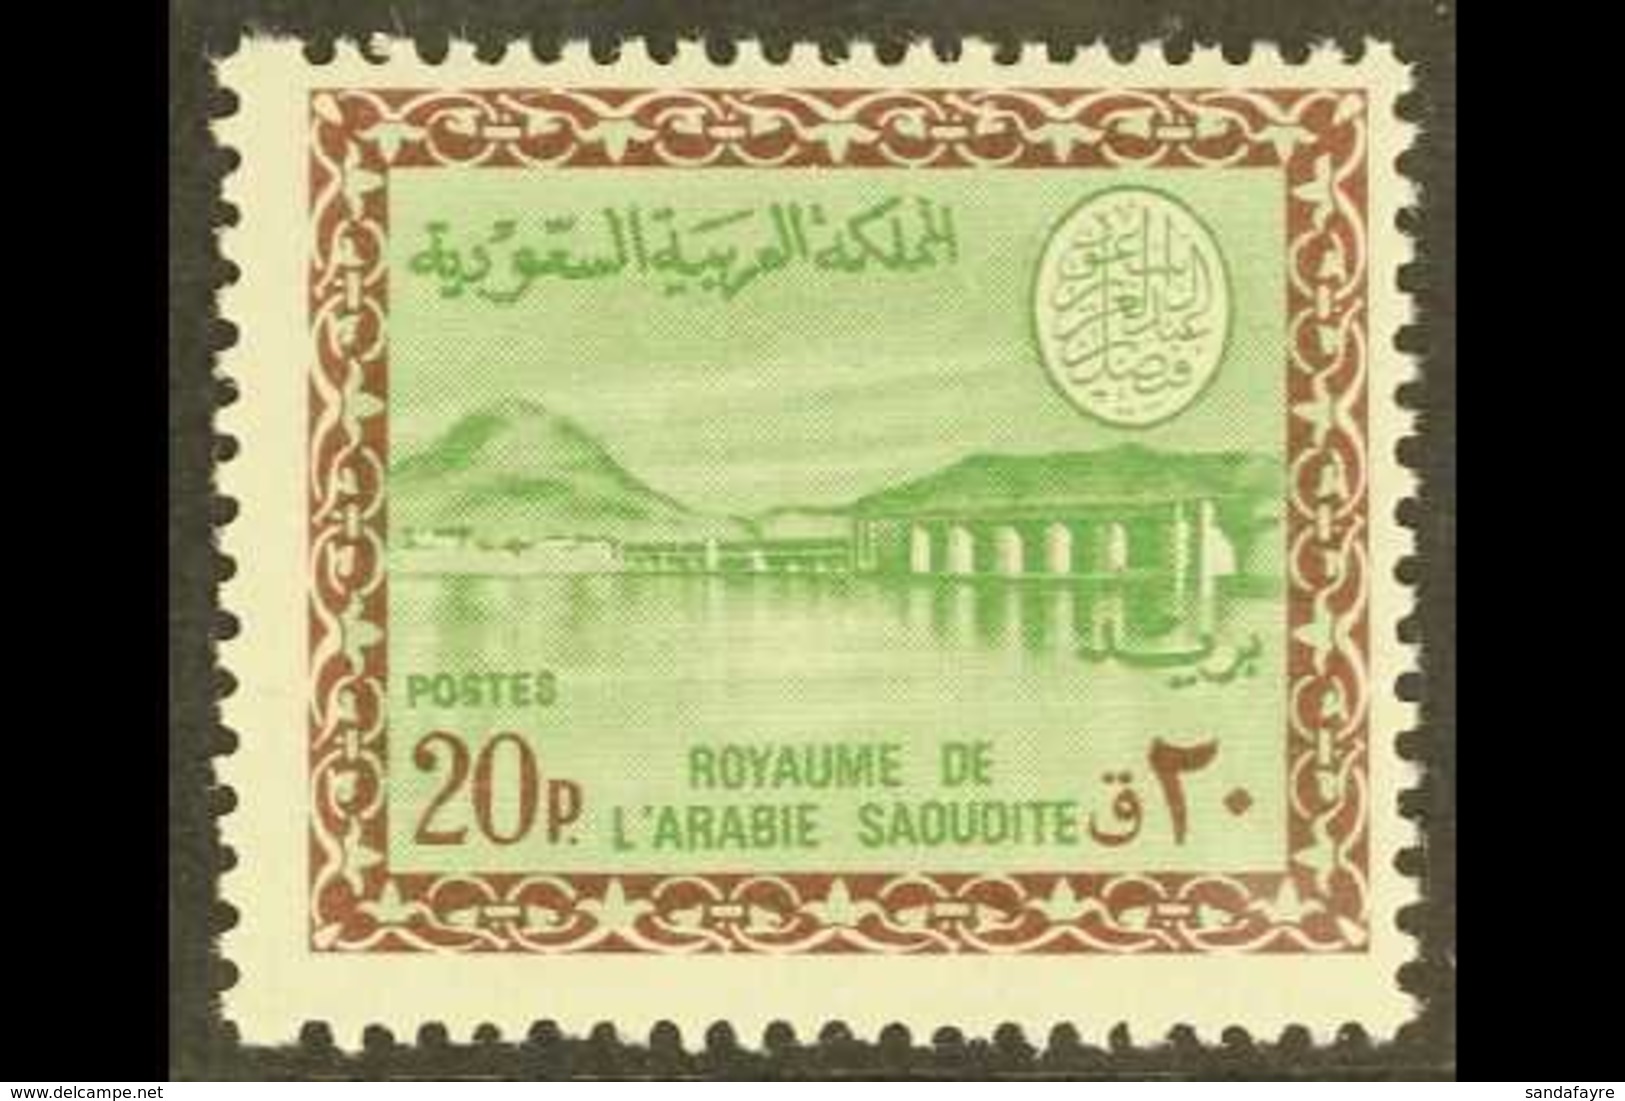 1966-75 20p Green And Chocolate Wadi Hanifa Dam, SG 707, Never Hinged Mint. For More Images, Please Visit Http://www.san - Saudi Arabia